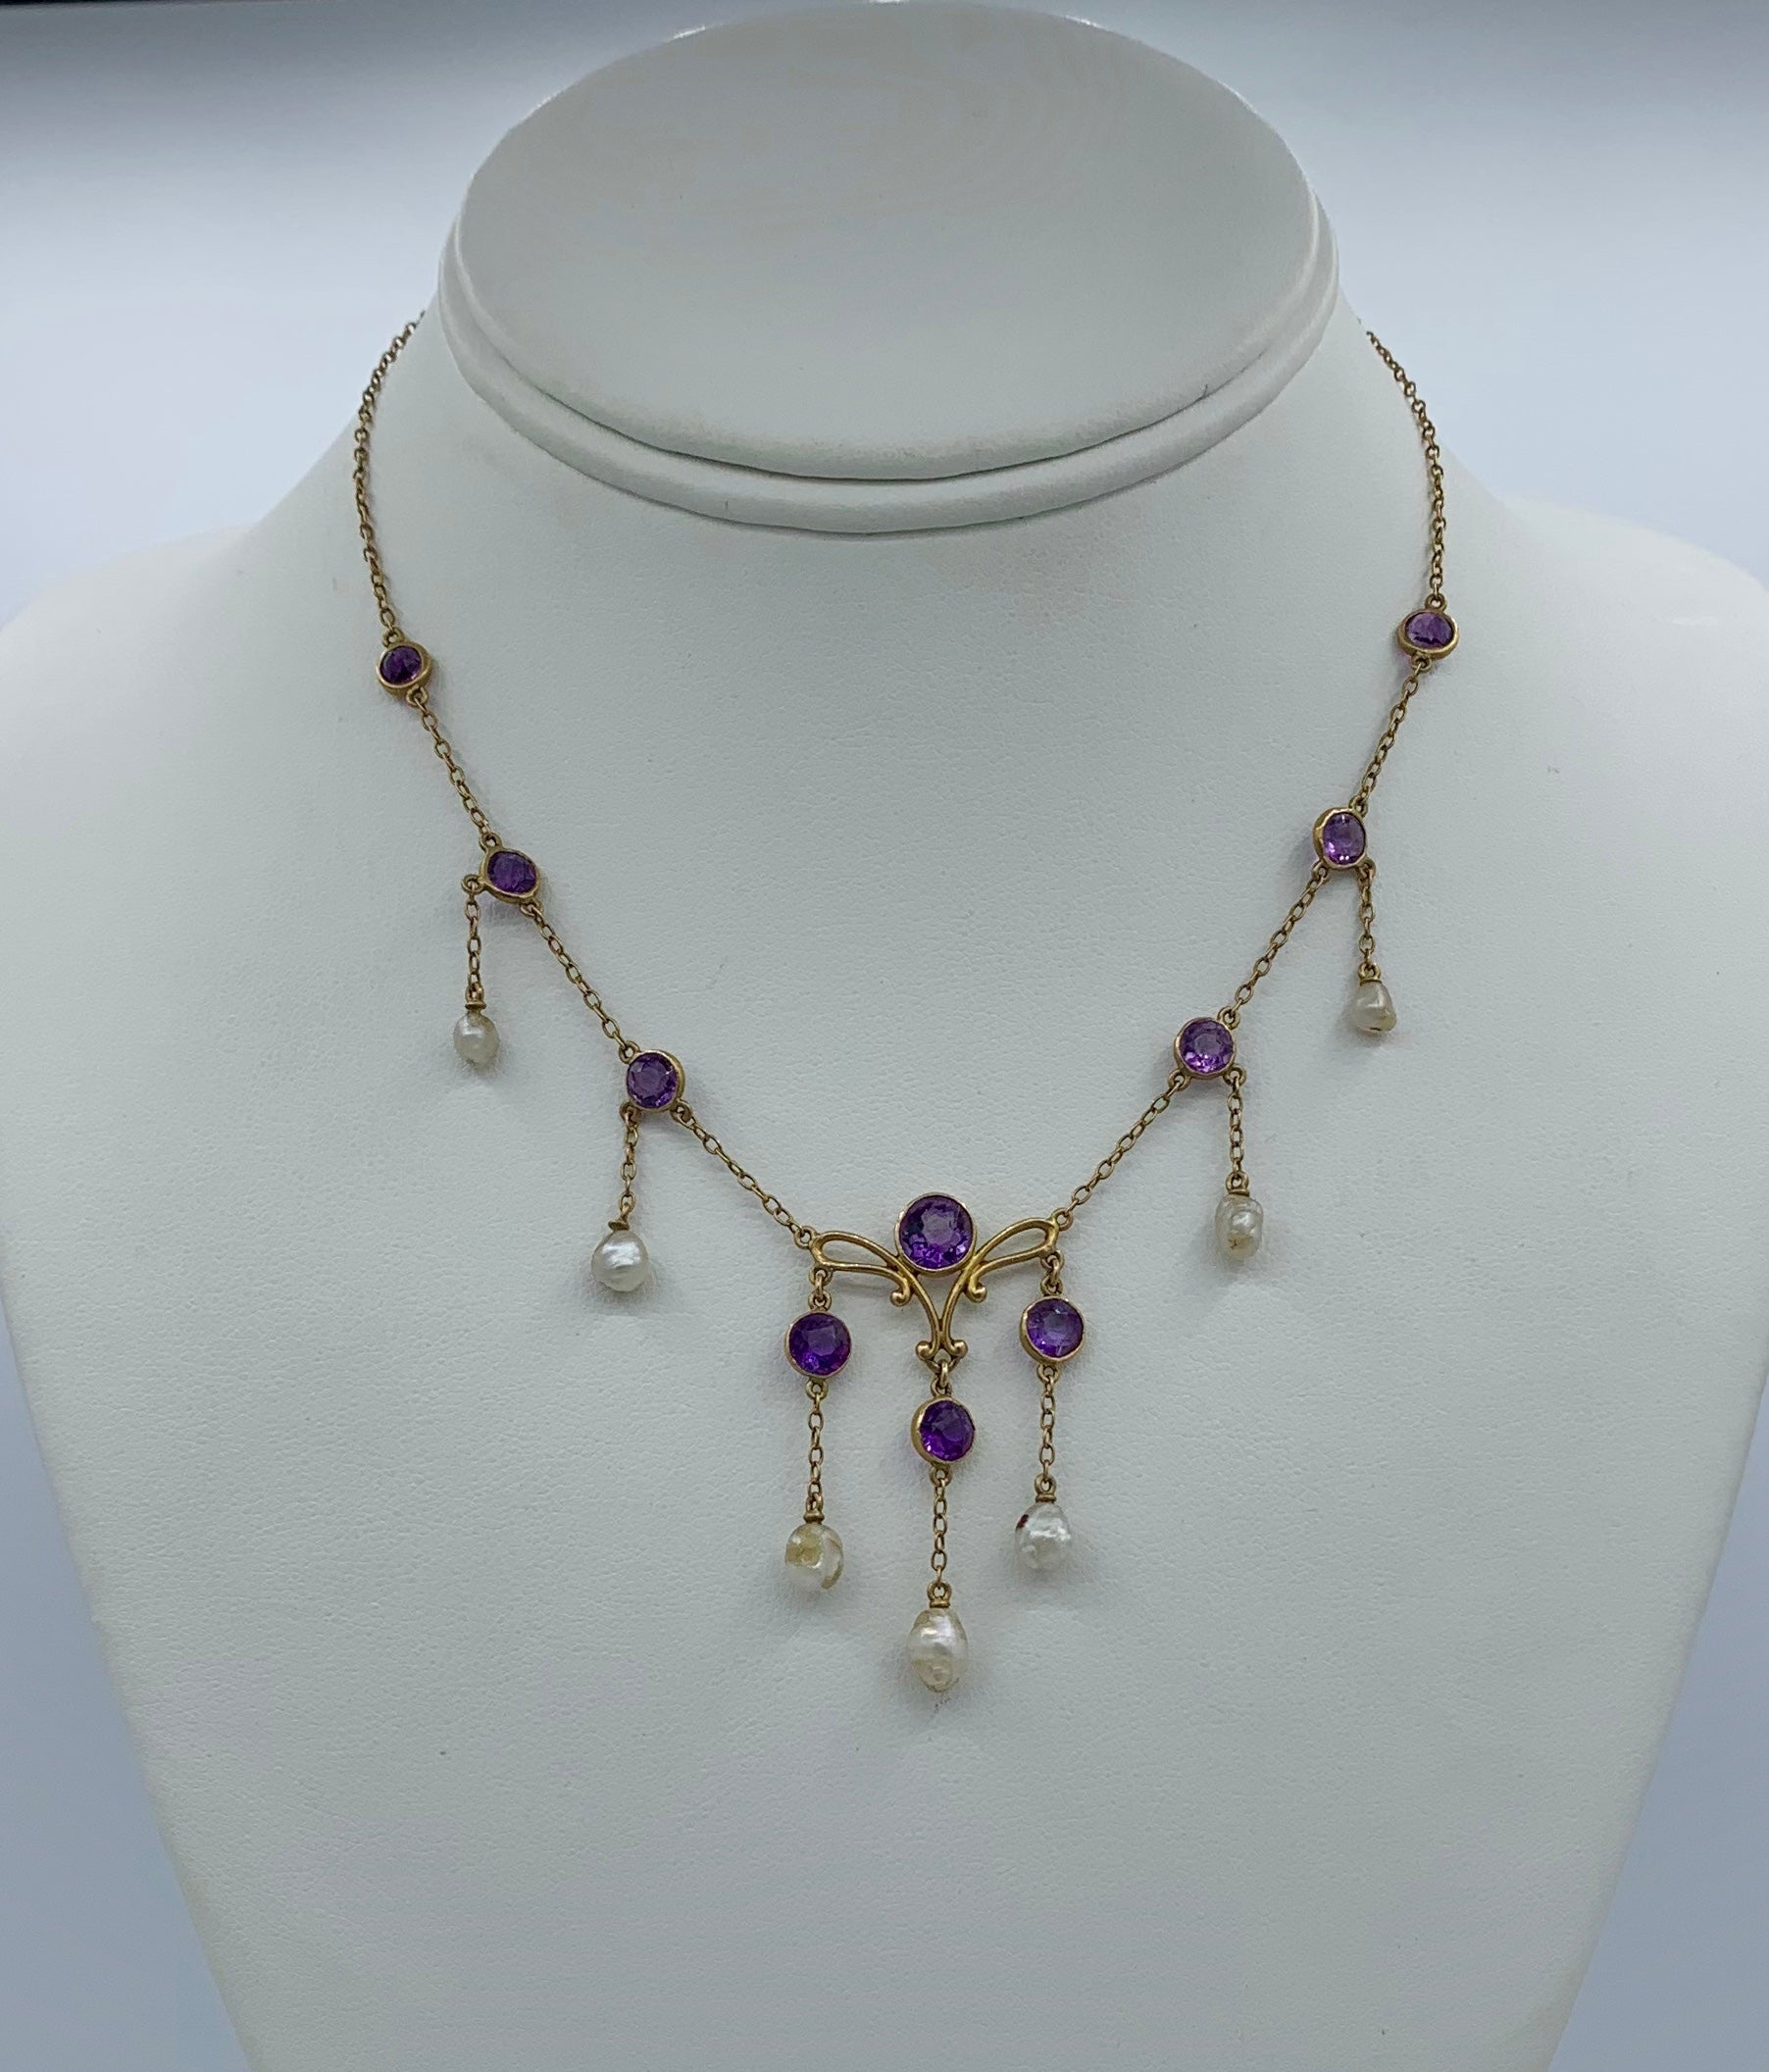 THIS IS A STUNNING VICTORIAN - ART NOUVEAU - BELLE EPOQUE NECKLACE WITH THE MOST GORGEOUS NATURAL ROUND FACETED SIBERIAN AMETHYST GEMS SET IN A WONDERFUL PENDANT DROP DESIGN WITH NATURAL PEARLS IN 14 KARAT GOLD.
This antique pendant necklace is such